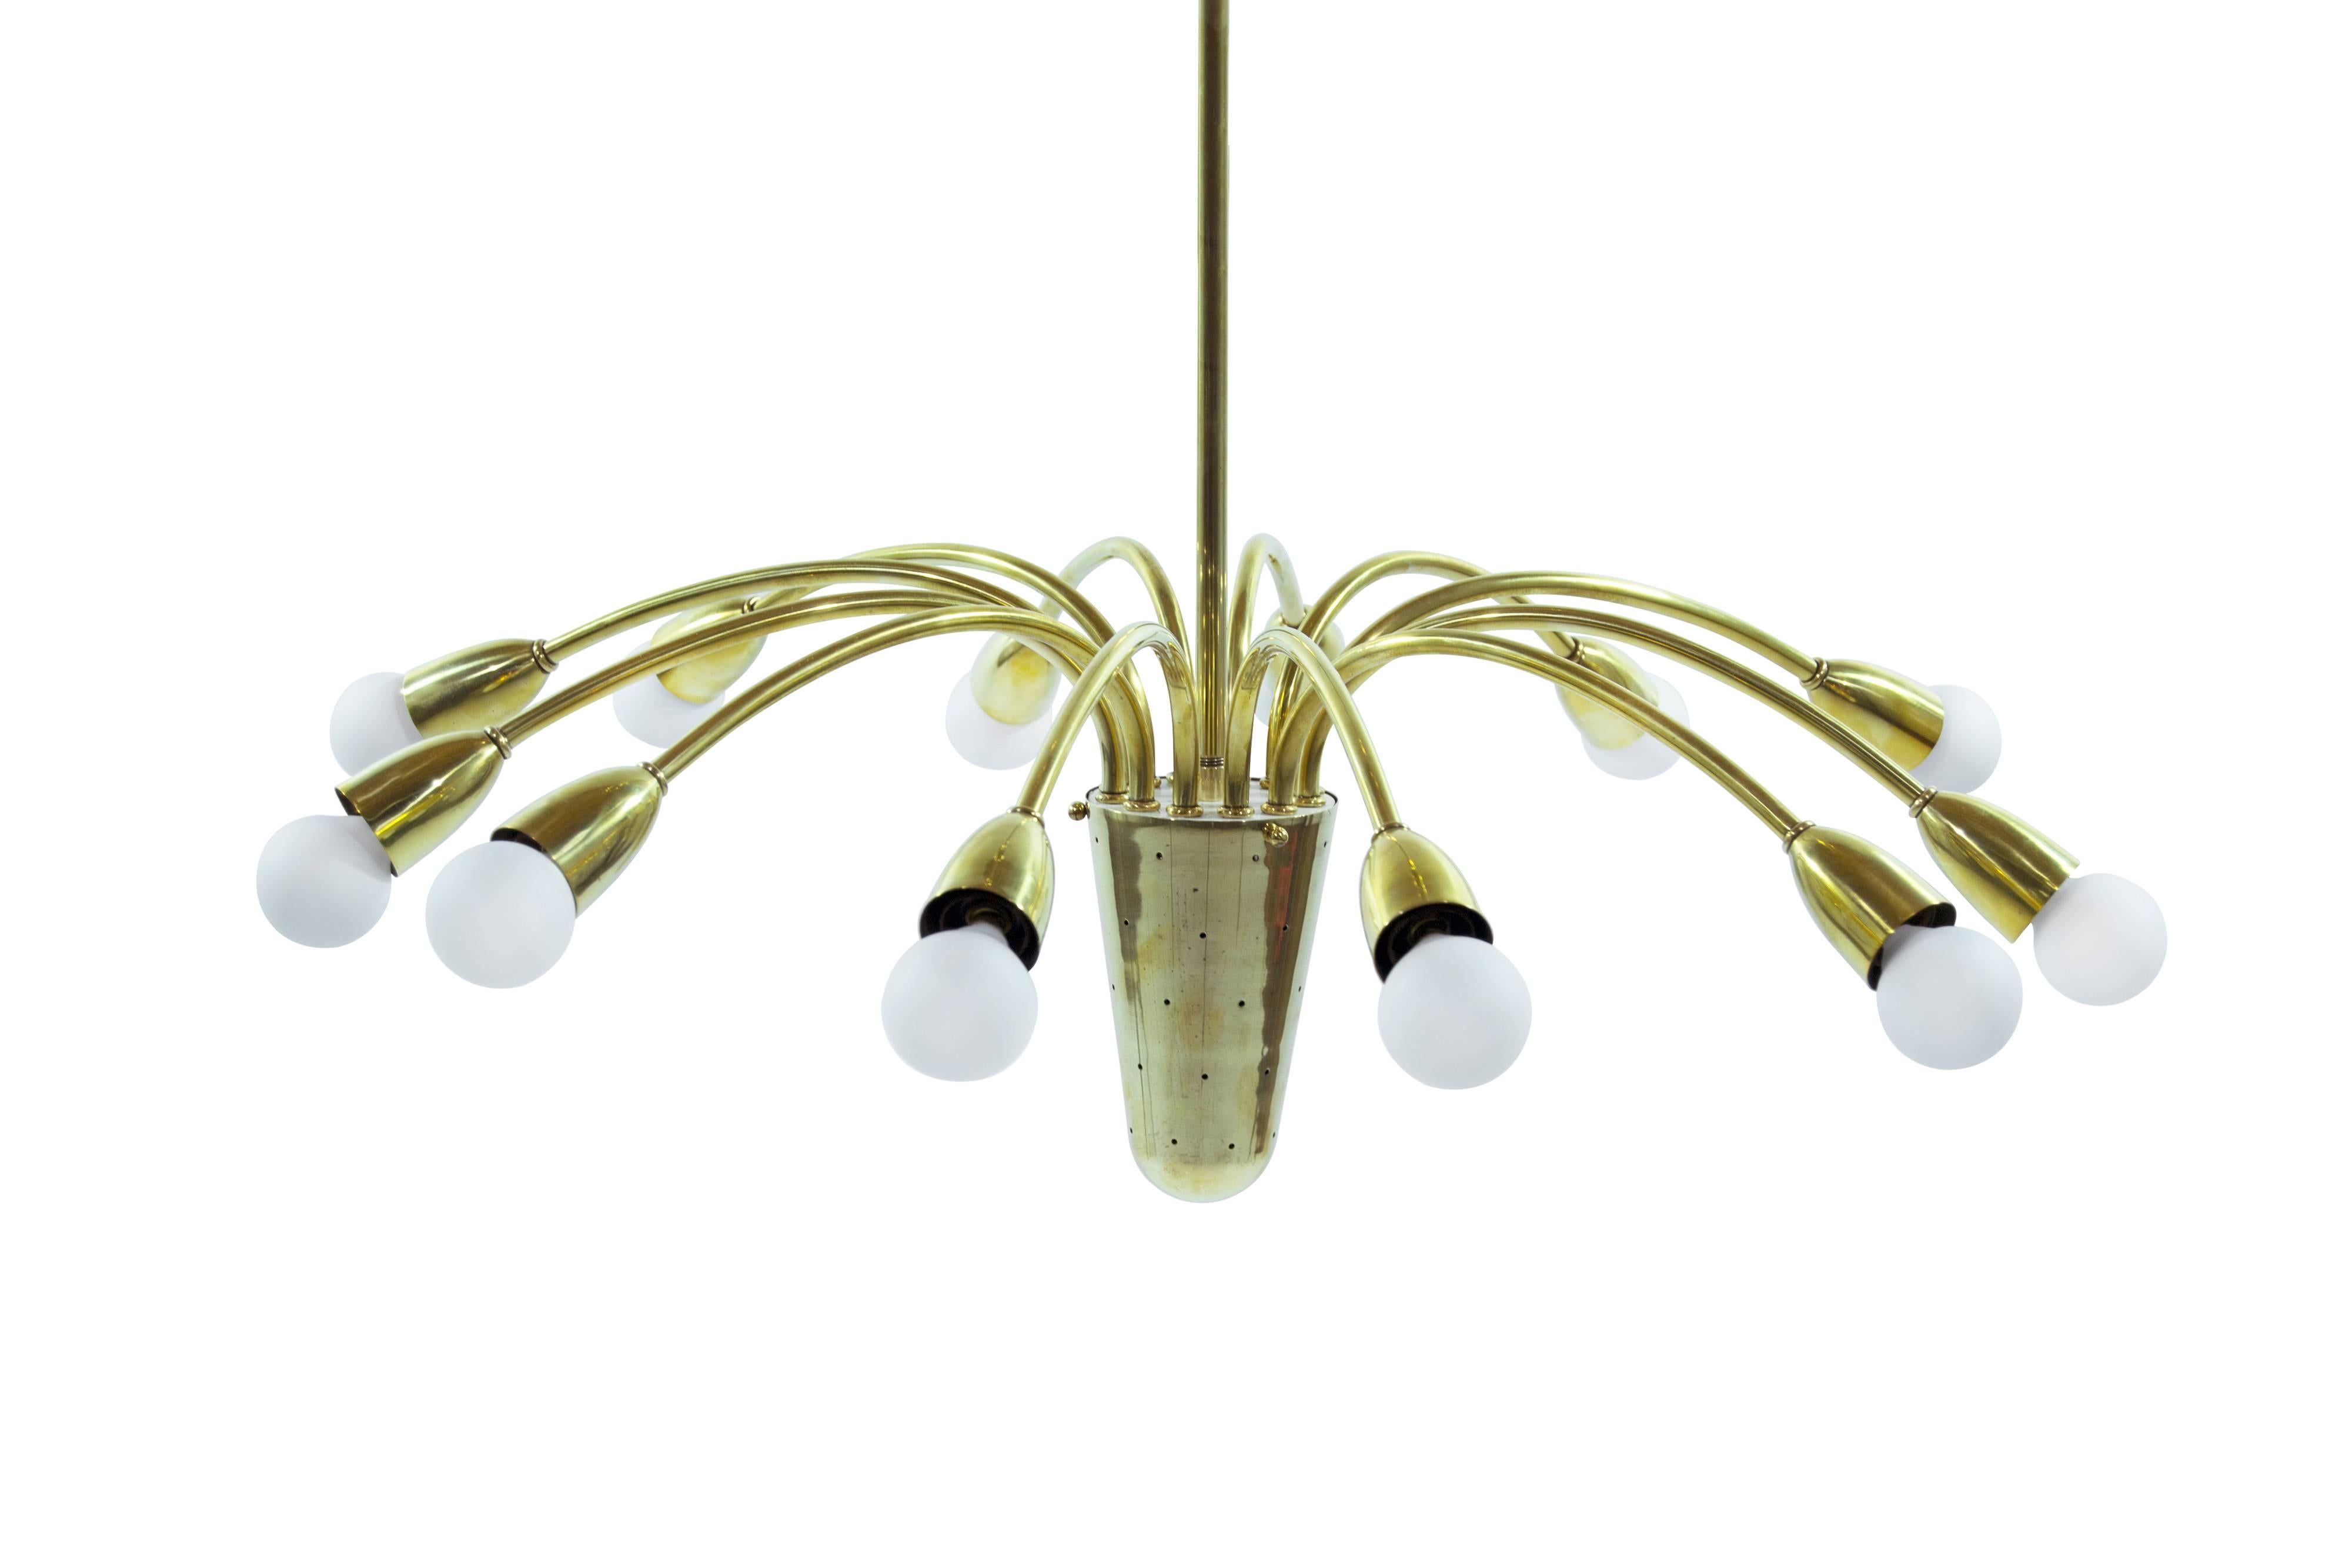 Sputnik light fixture, featuring 12 arms in brass. Newly rewired.